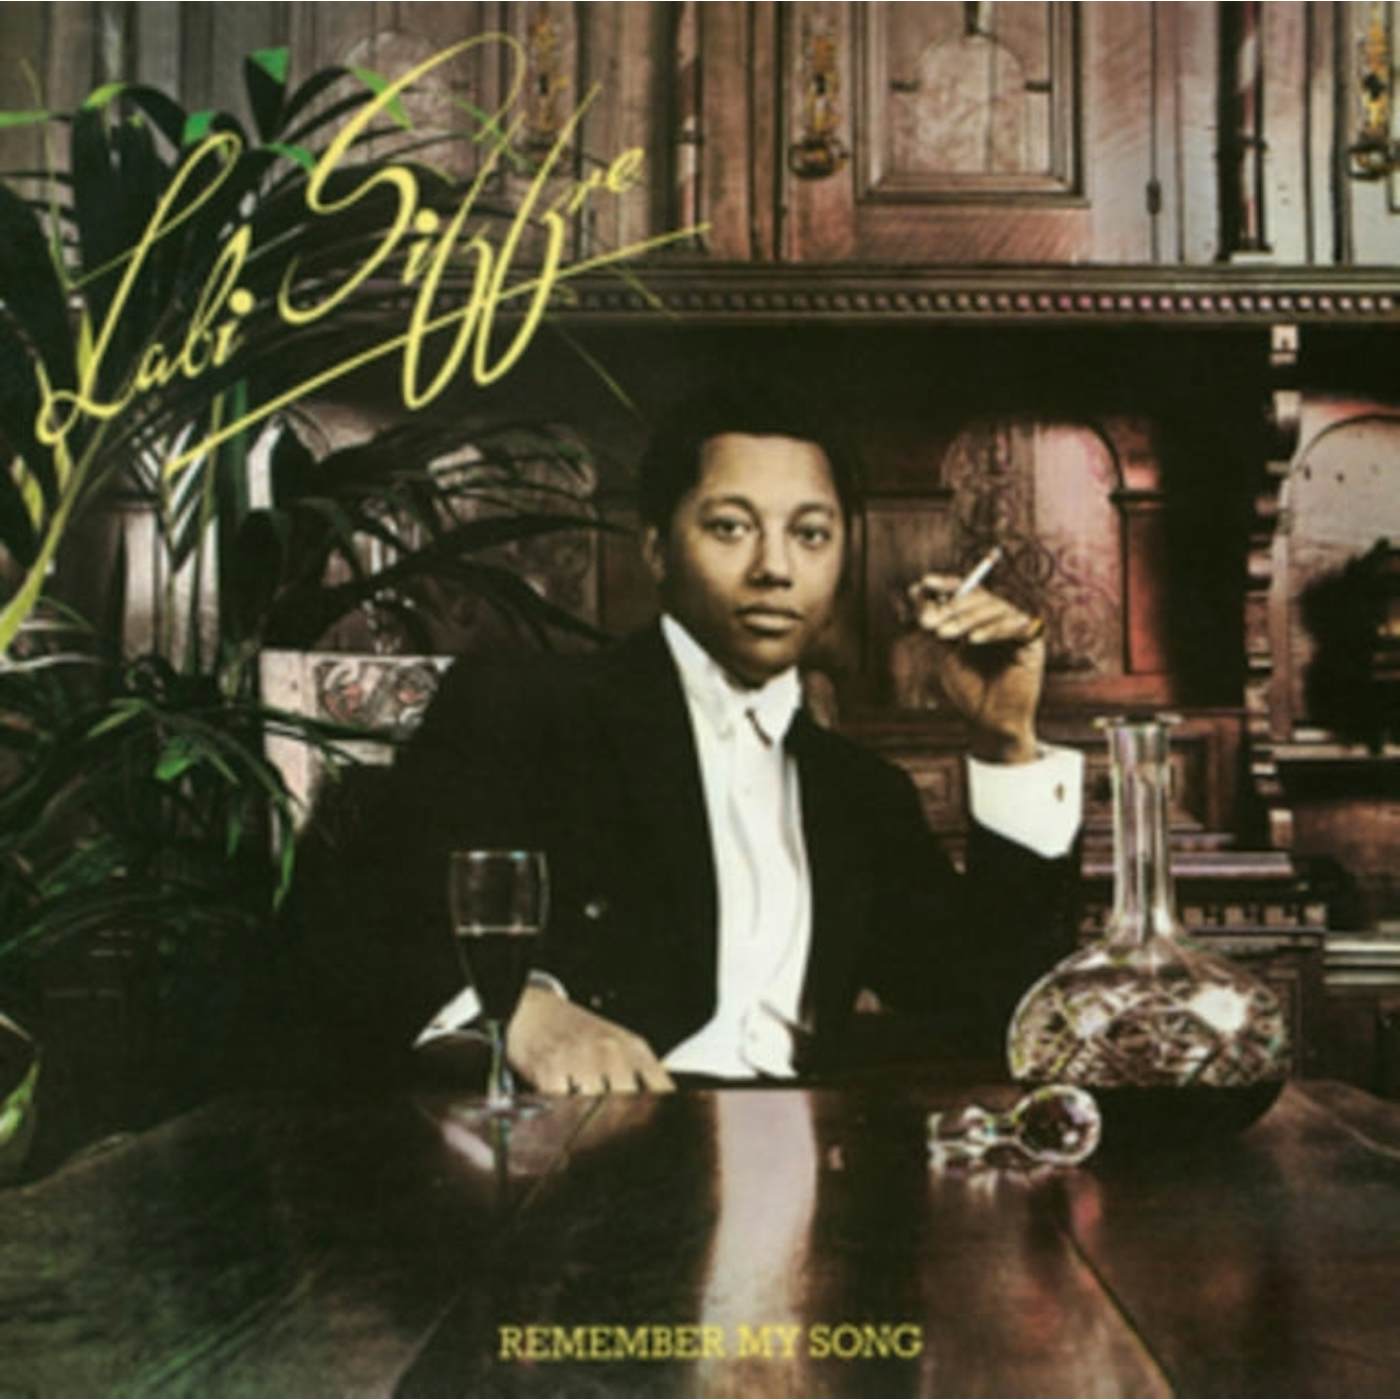 Labi Siffre LP Vinyl Record - Remember My Song